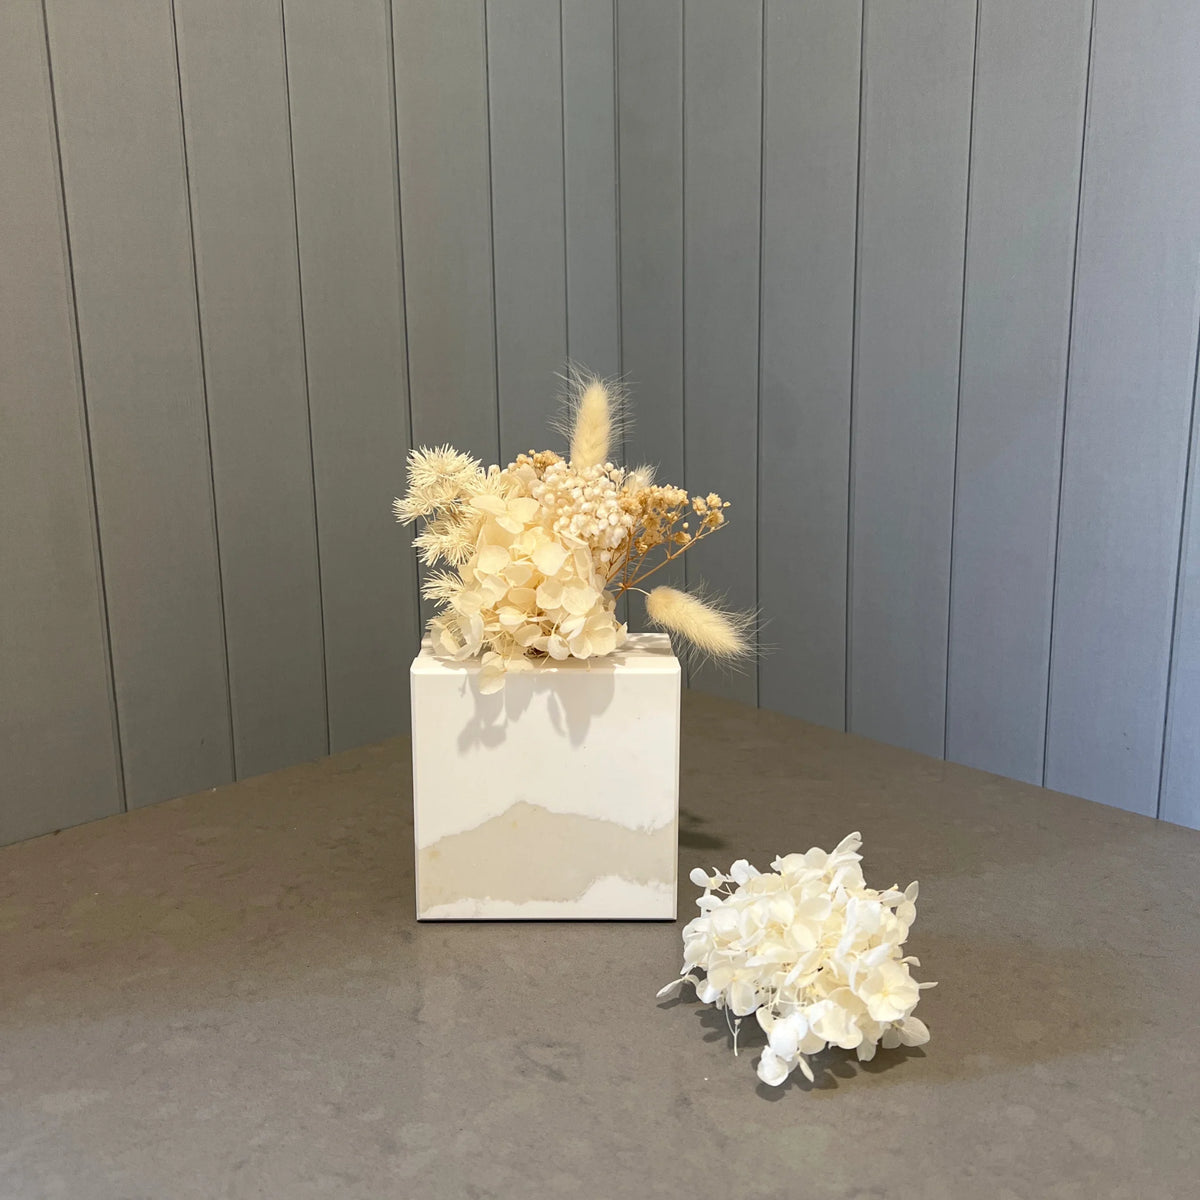 Solid marble like mini stone vase in Caesarstone Calacutta Maximus with mini dried flower posy. This is the gift to buy when you think what to buy from someone that has everything.